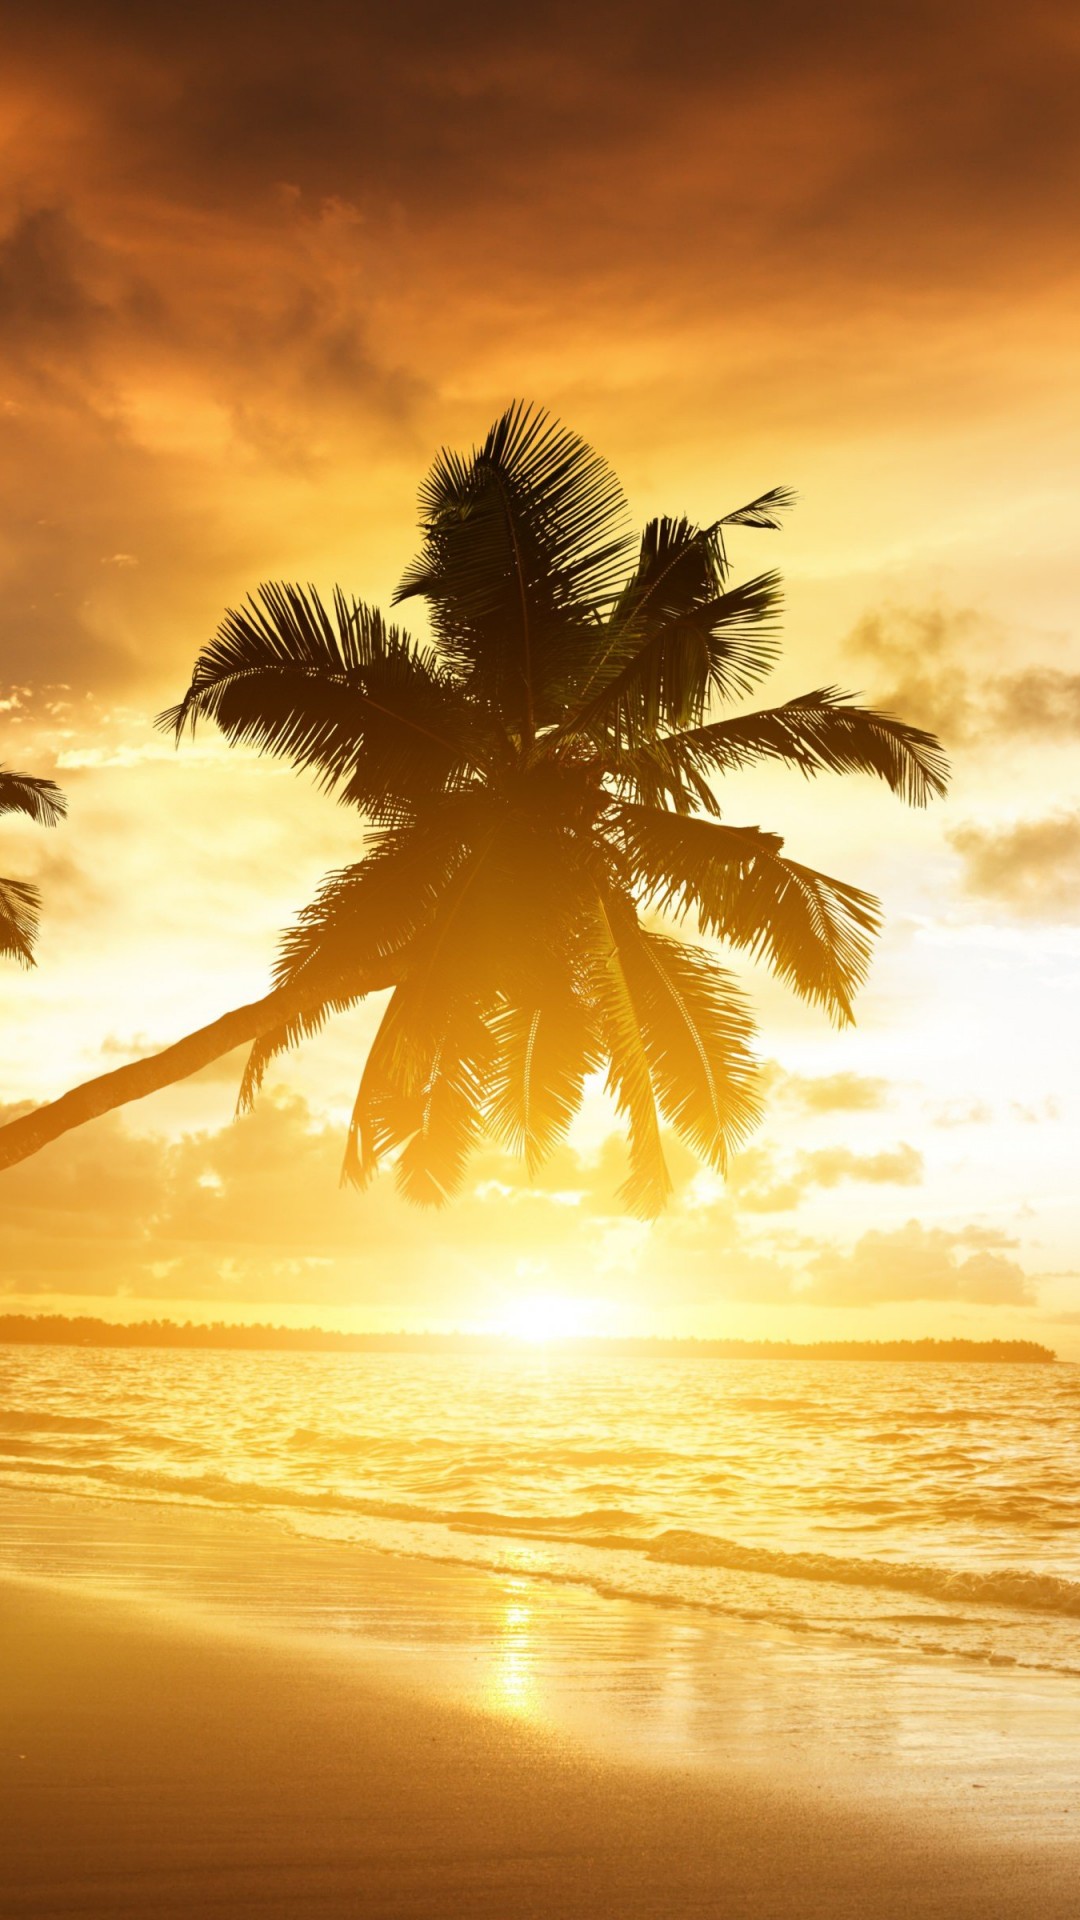 Beach With Palm Trees At Sunset Wallpaper for HTC One